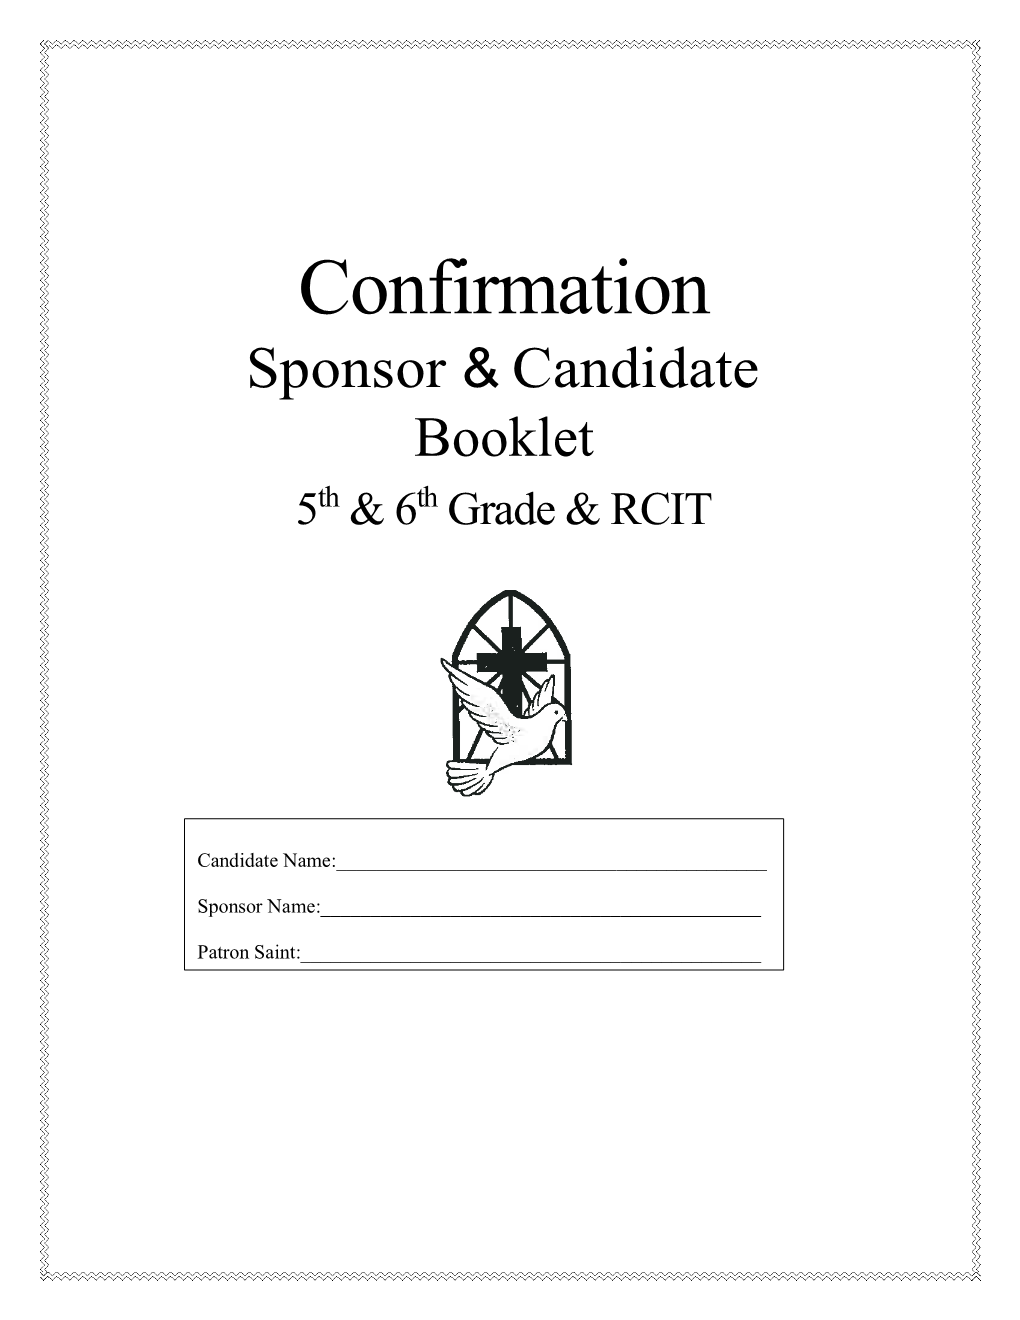 Confirmation Sponsor & Candidate Booklet 5Th & 6Th Grade & RCIT